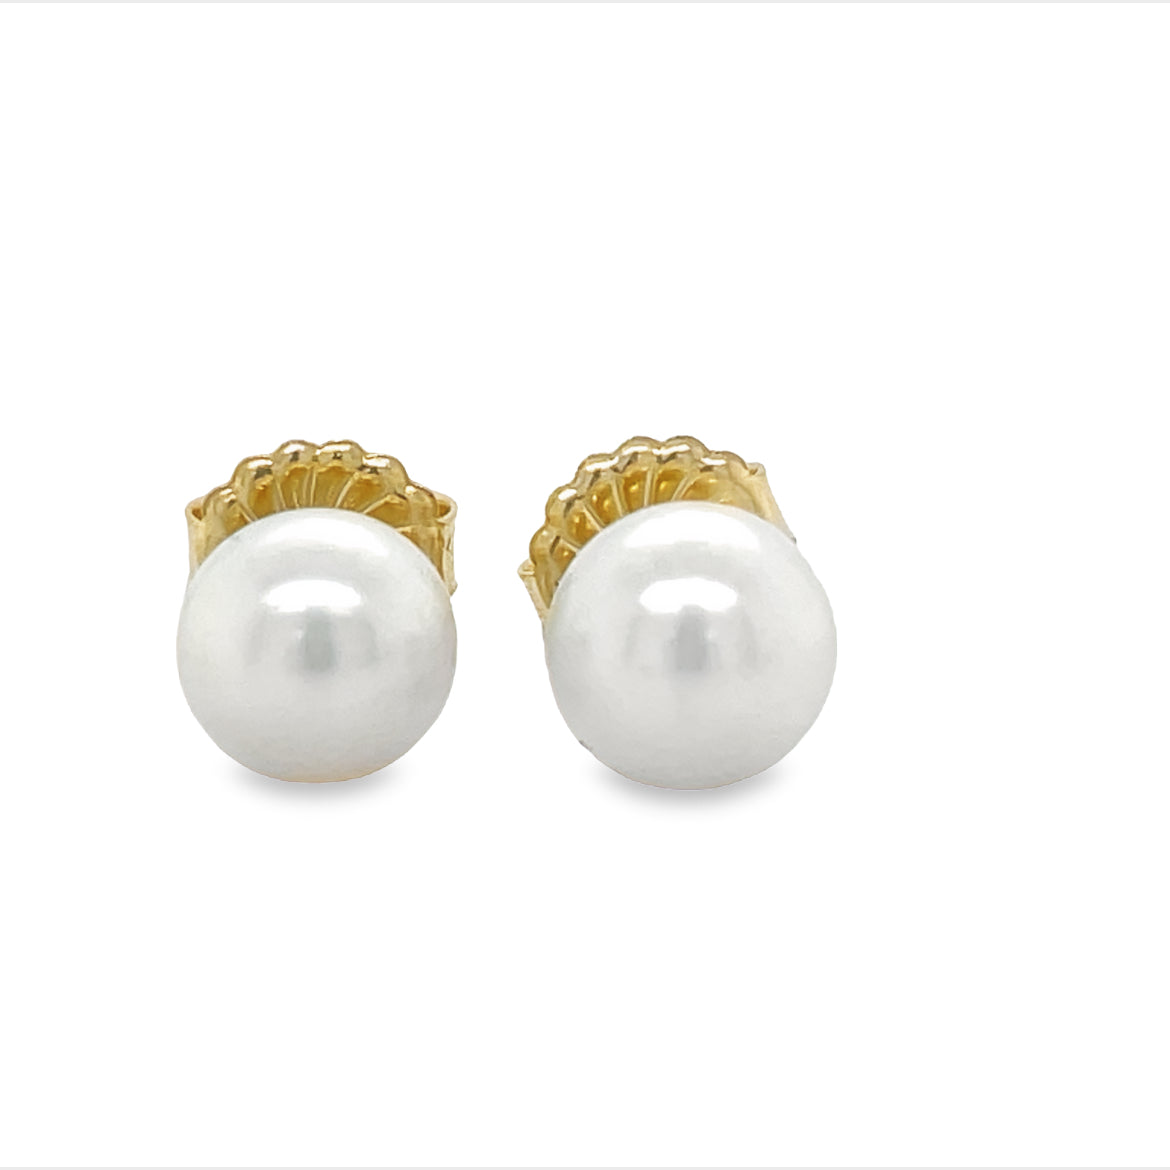 Two Cultured Pearls  8.50 mm.  Set in 14k Yellow Gold.  Secure friction Backs  Good luster.